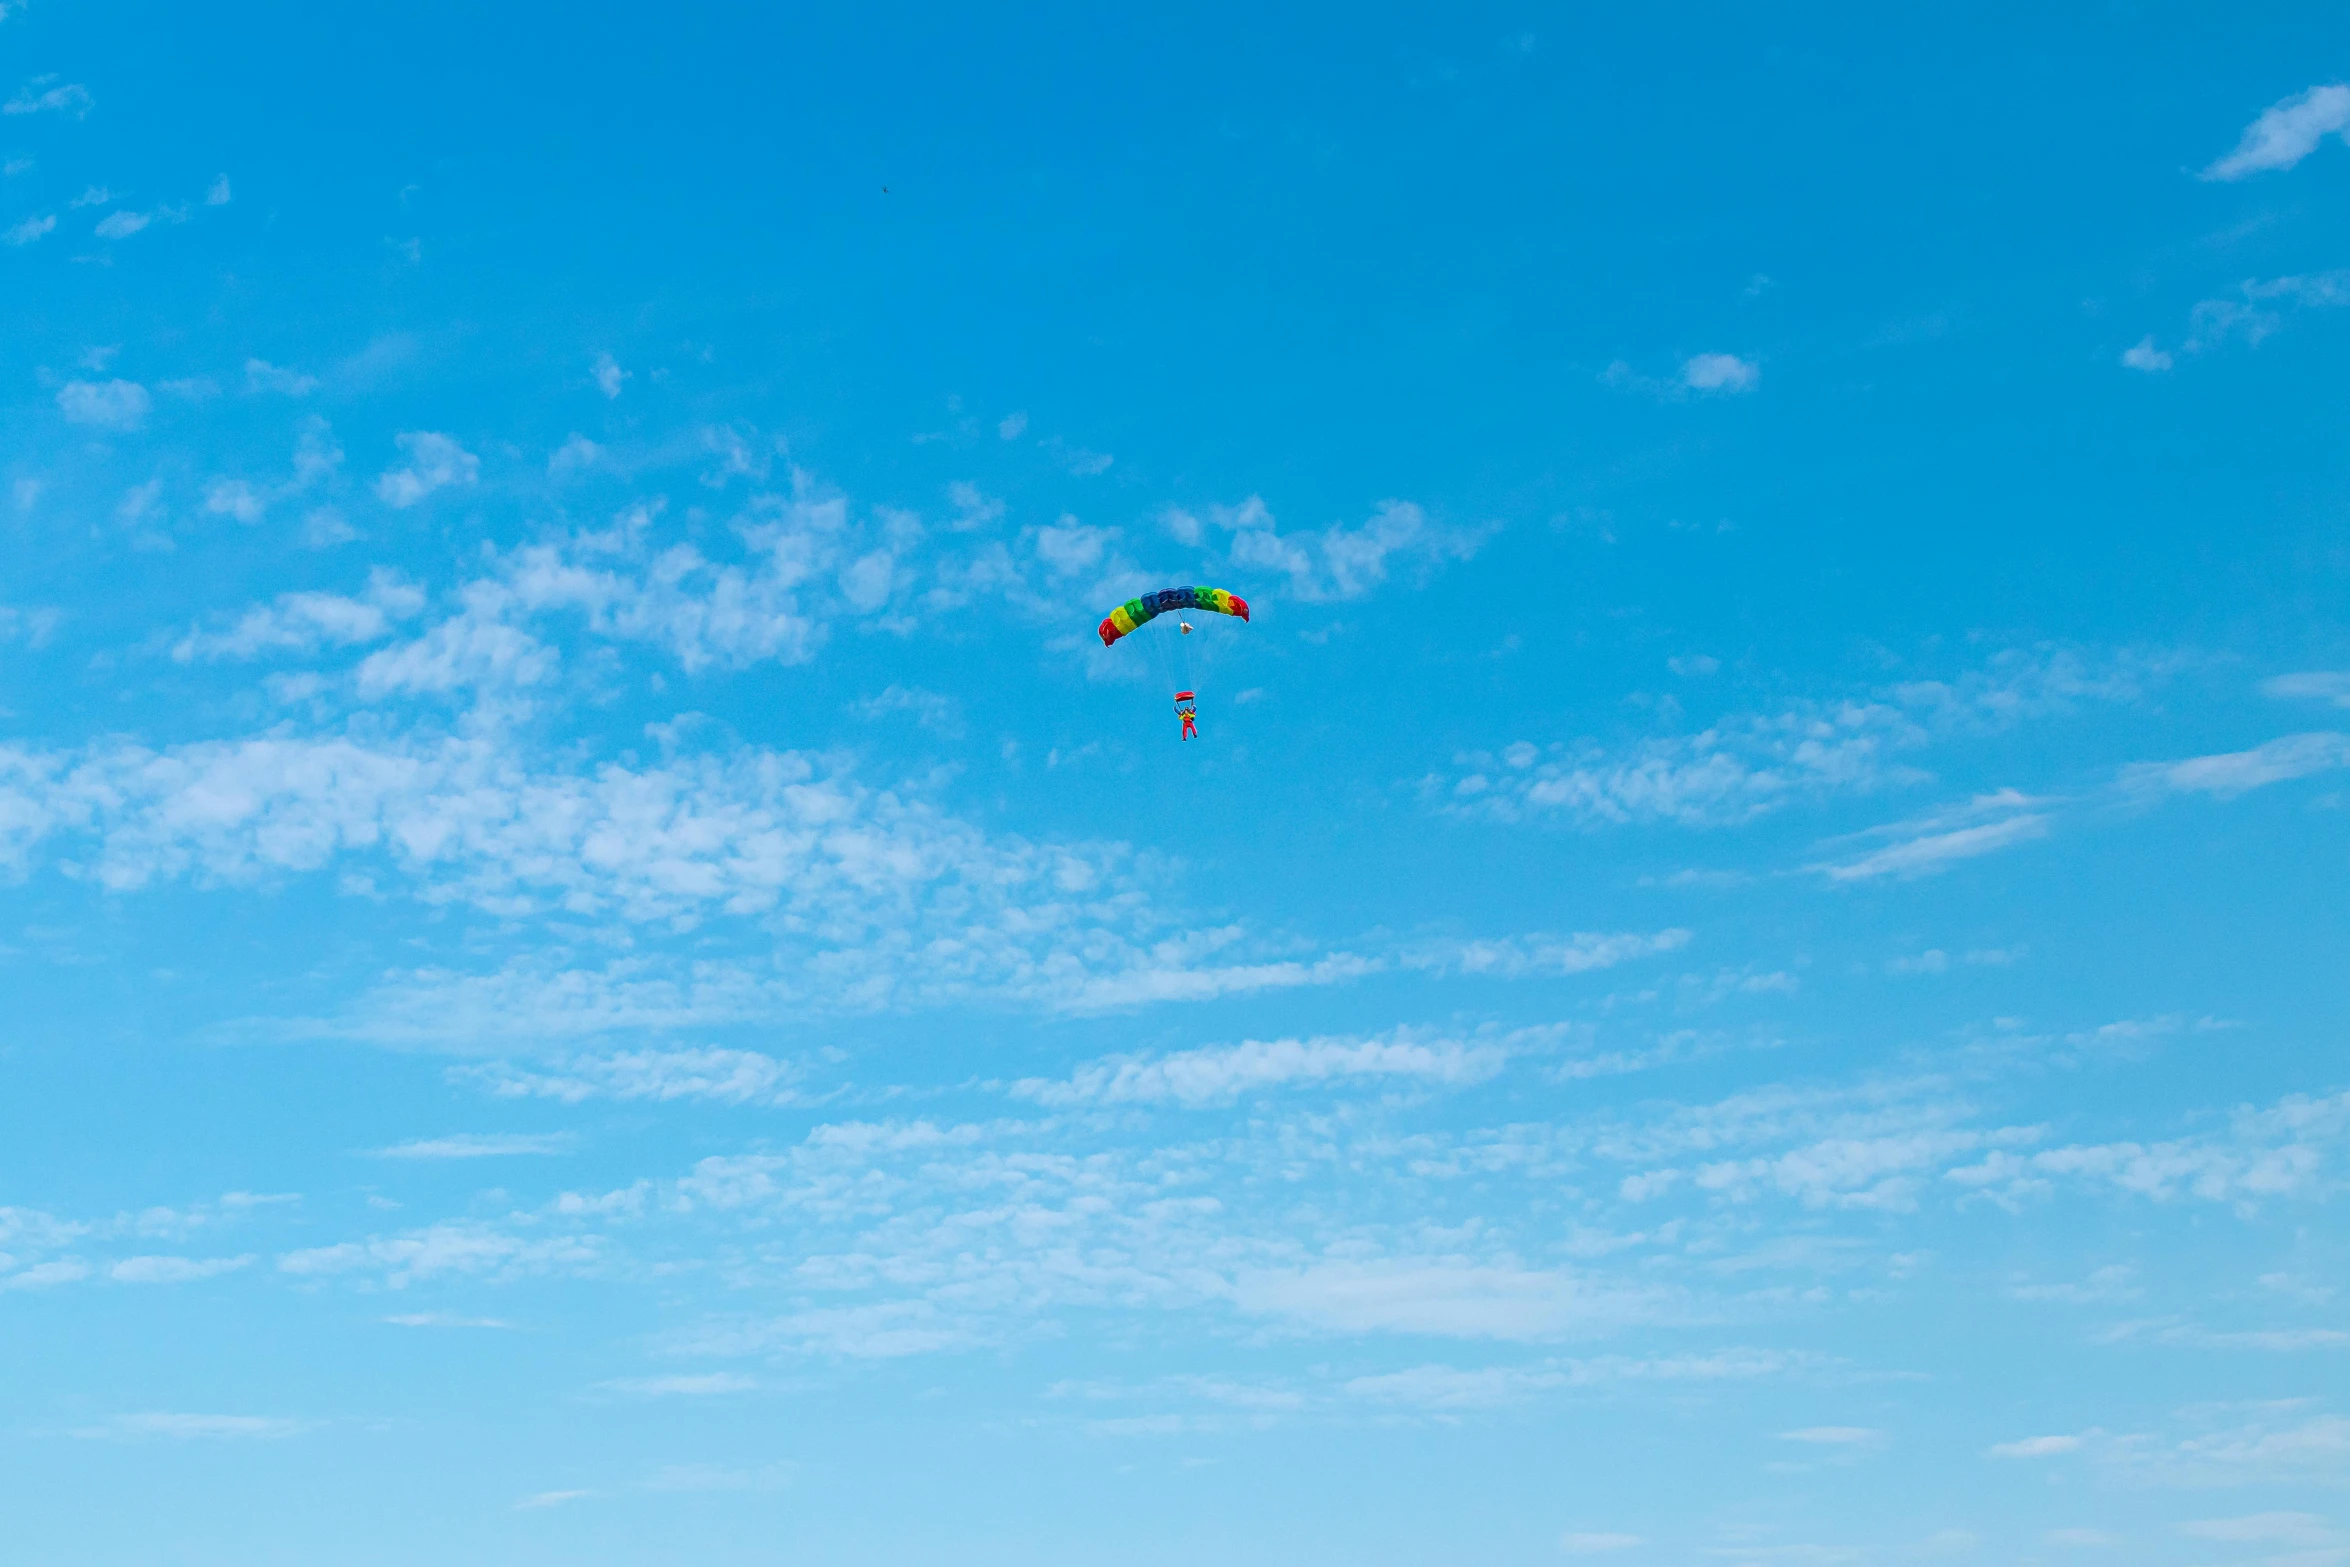 a group of people on a beach flying kites, pexels contest winner, figuration libre, benjamin netanyahu skydiving, with a blue background, viewed from a distance, hd wallpaper